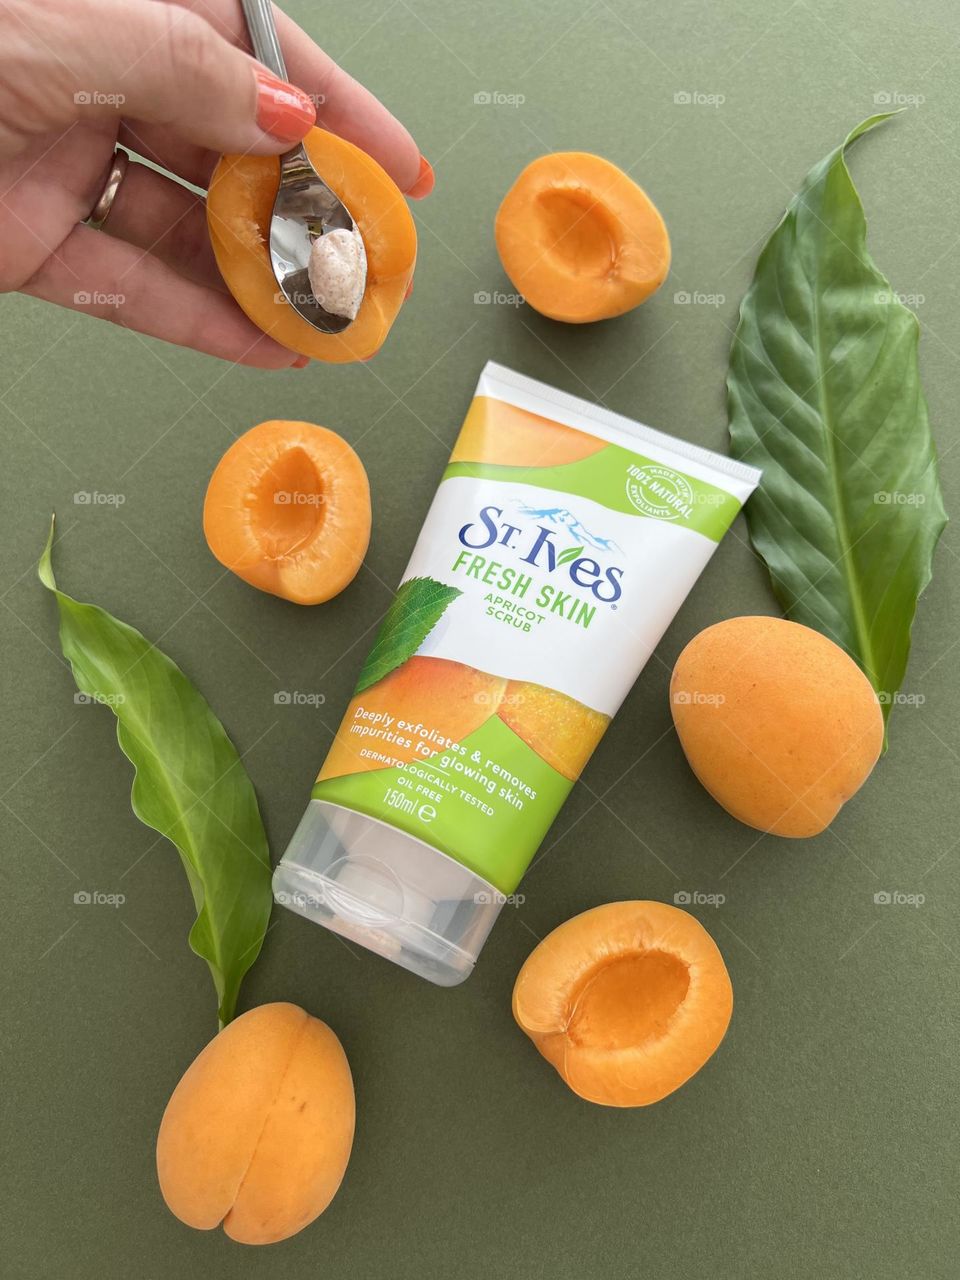 I love the St. Ives fresh skin apricot scrub and highly recommend ! 